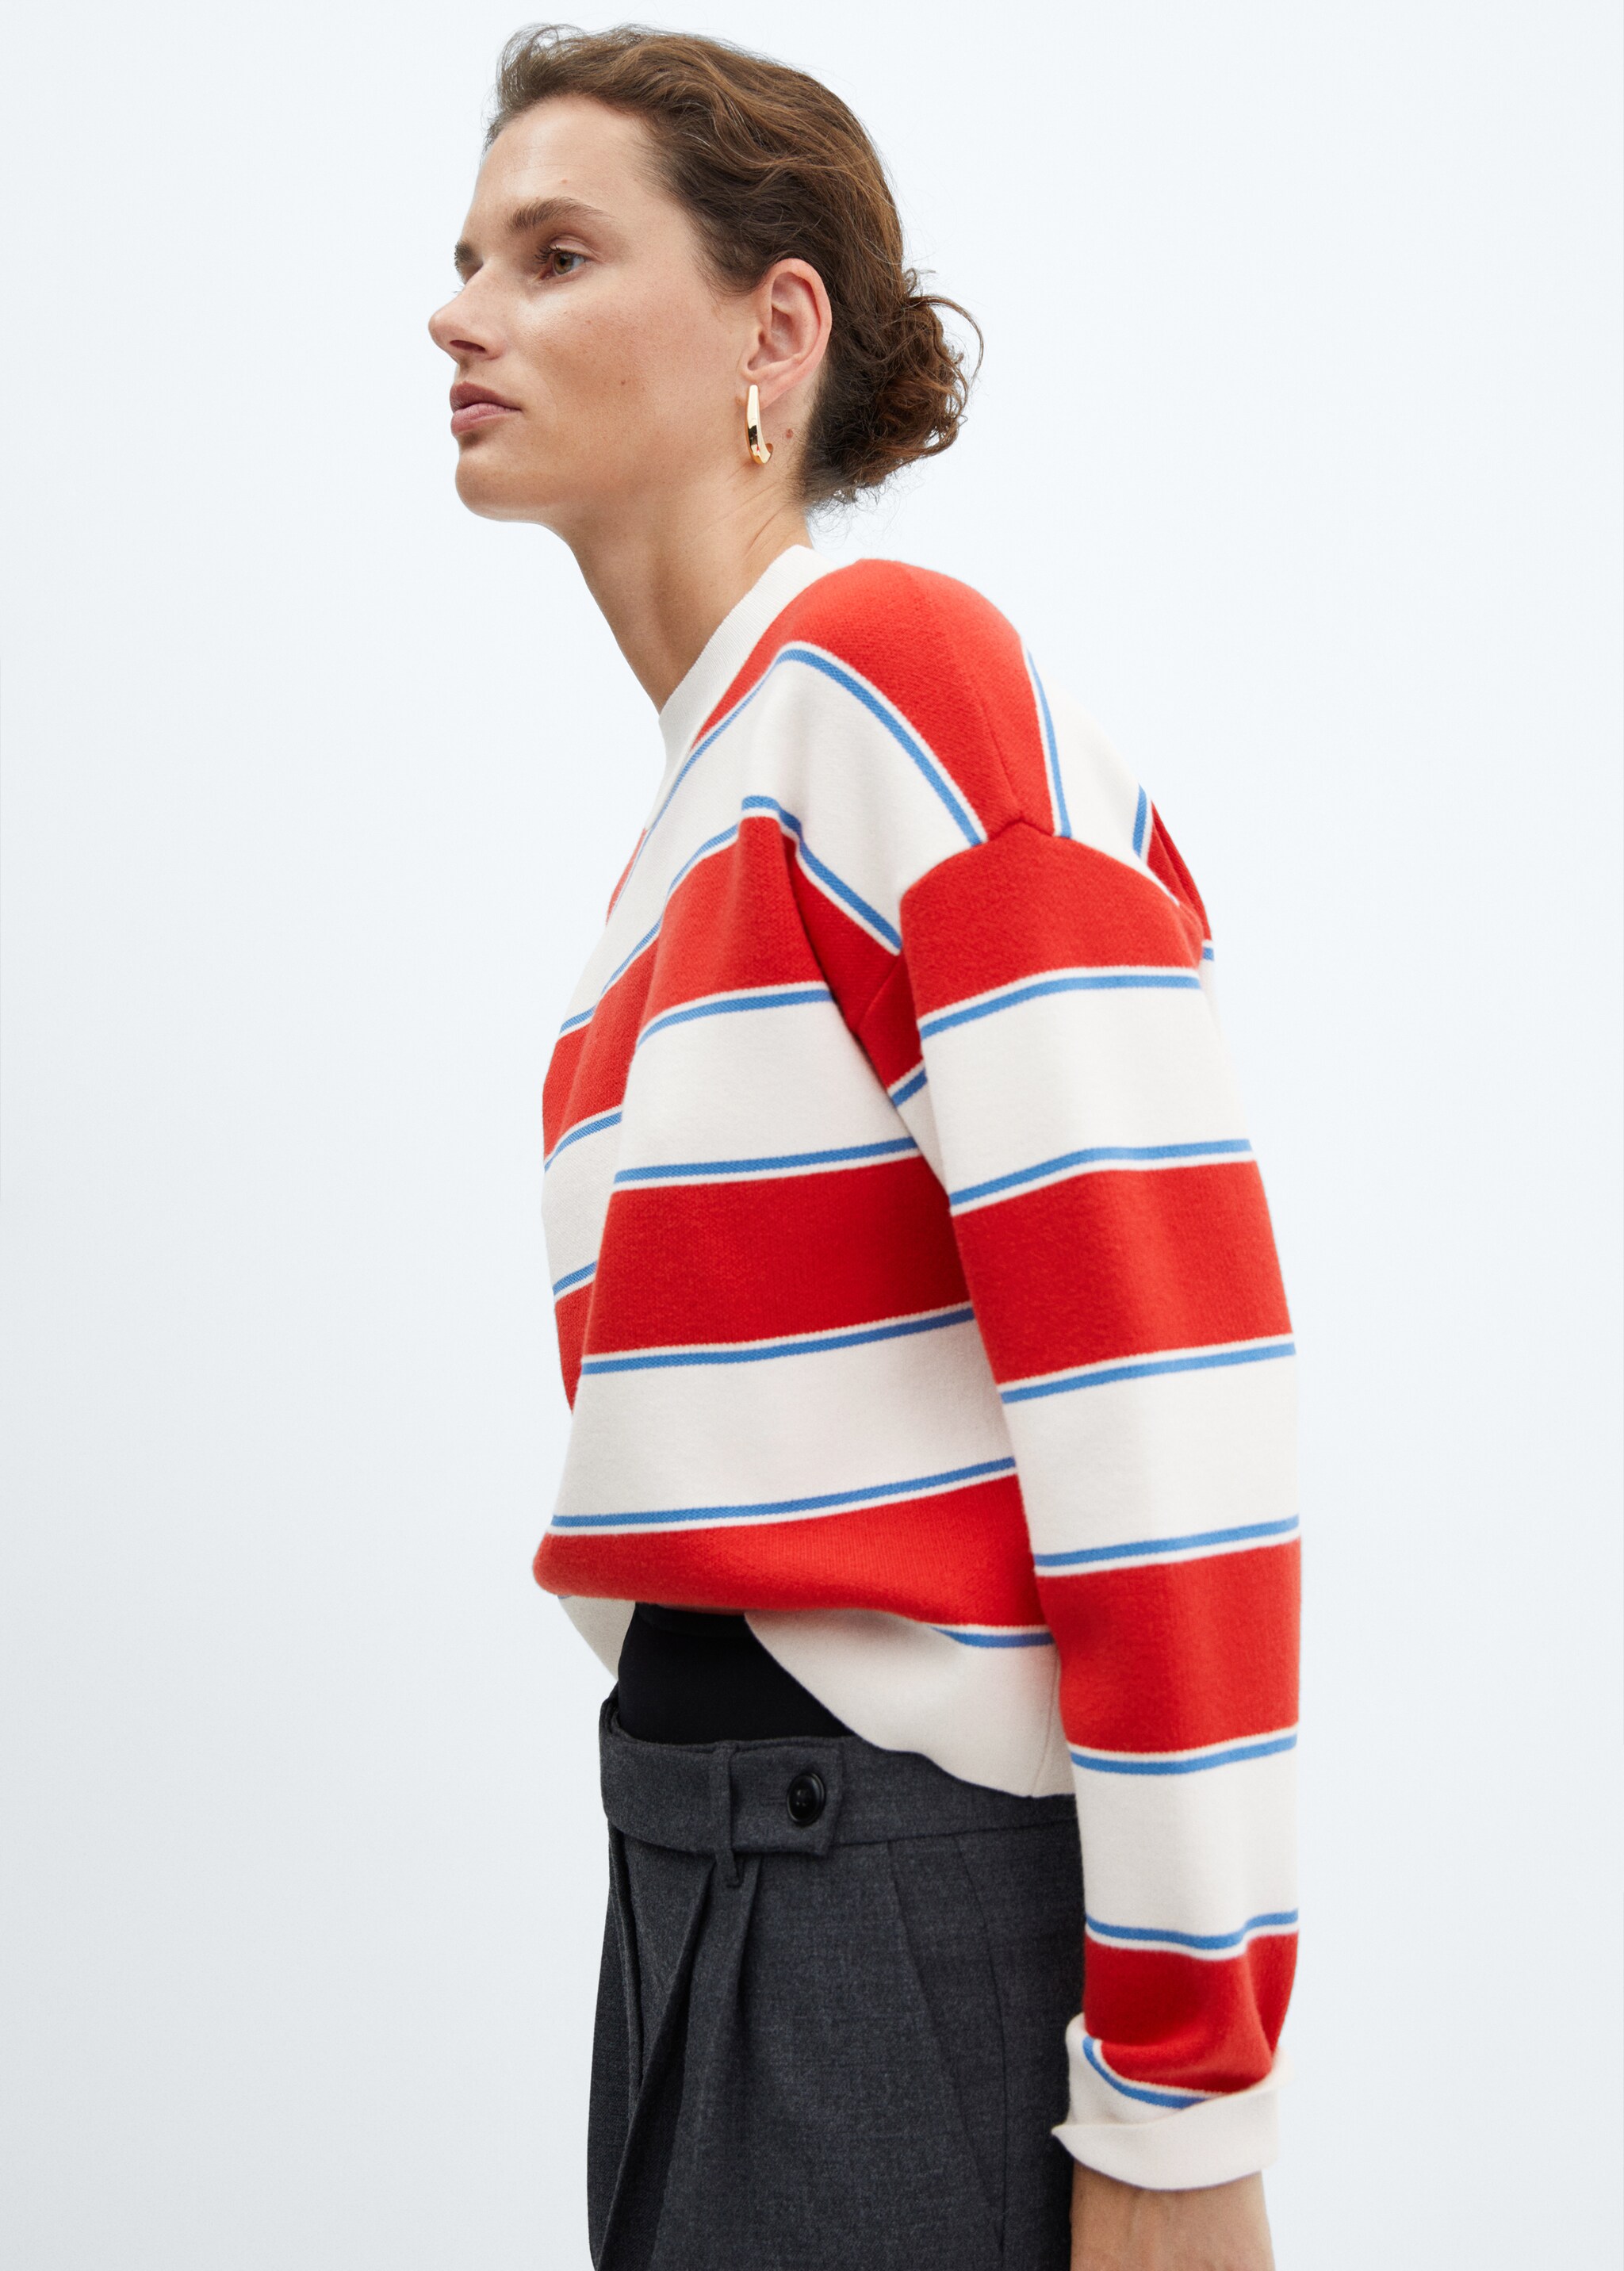 Wide-striped sweater - Details of the article 2